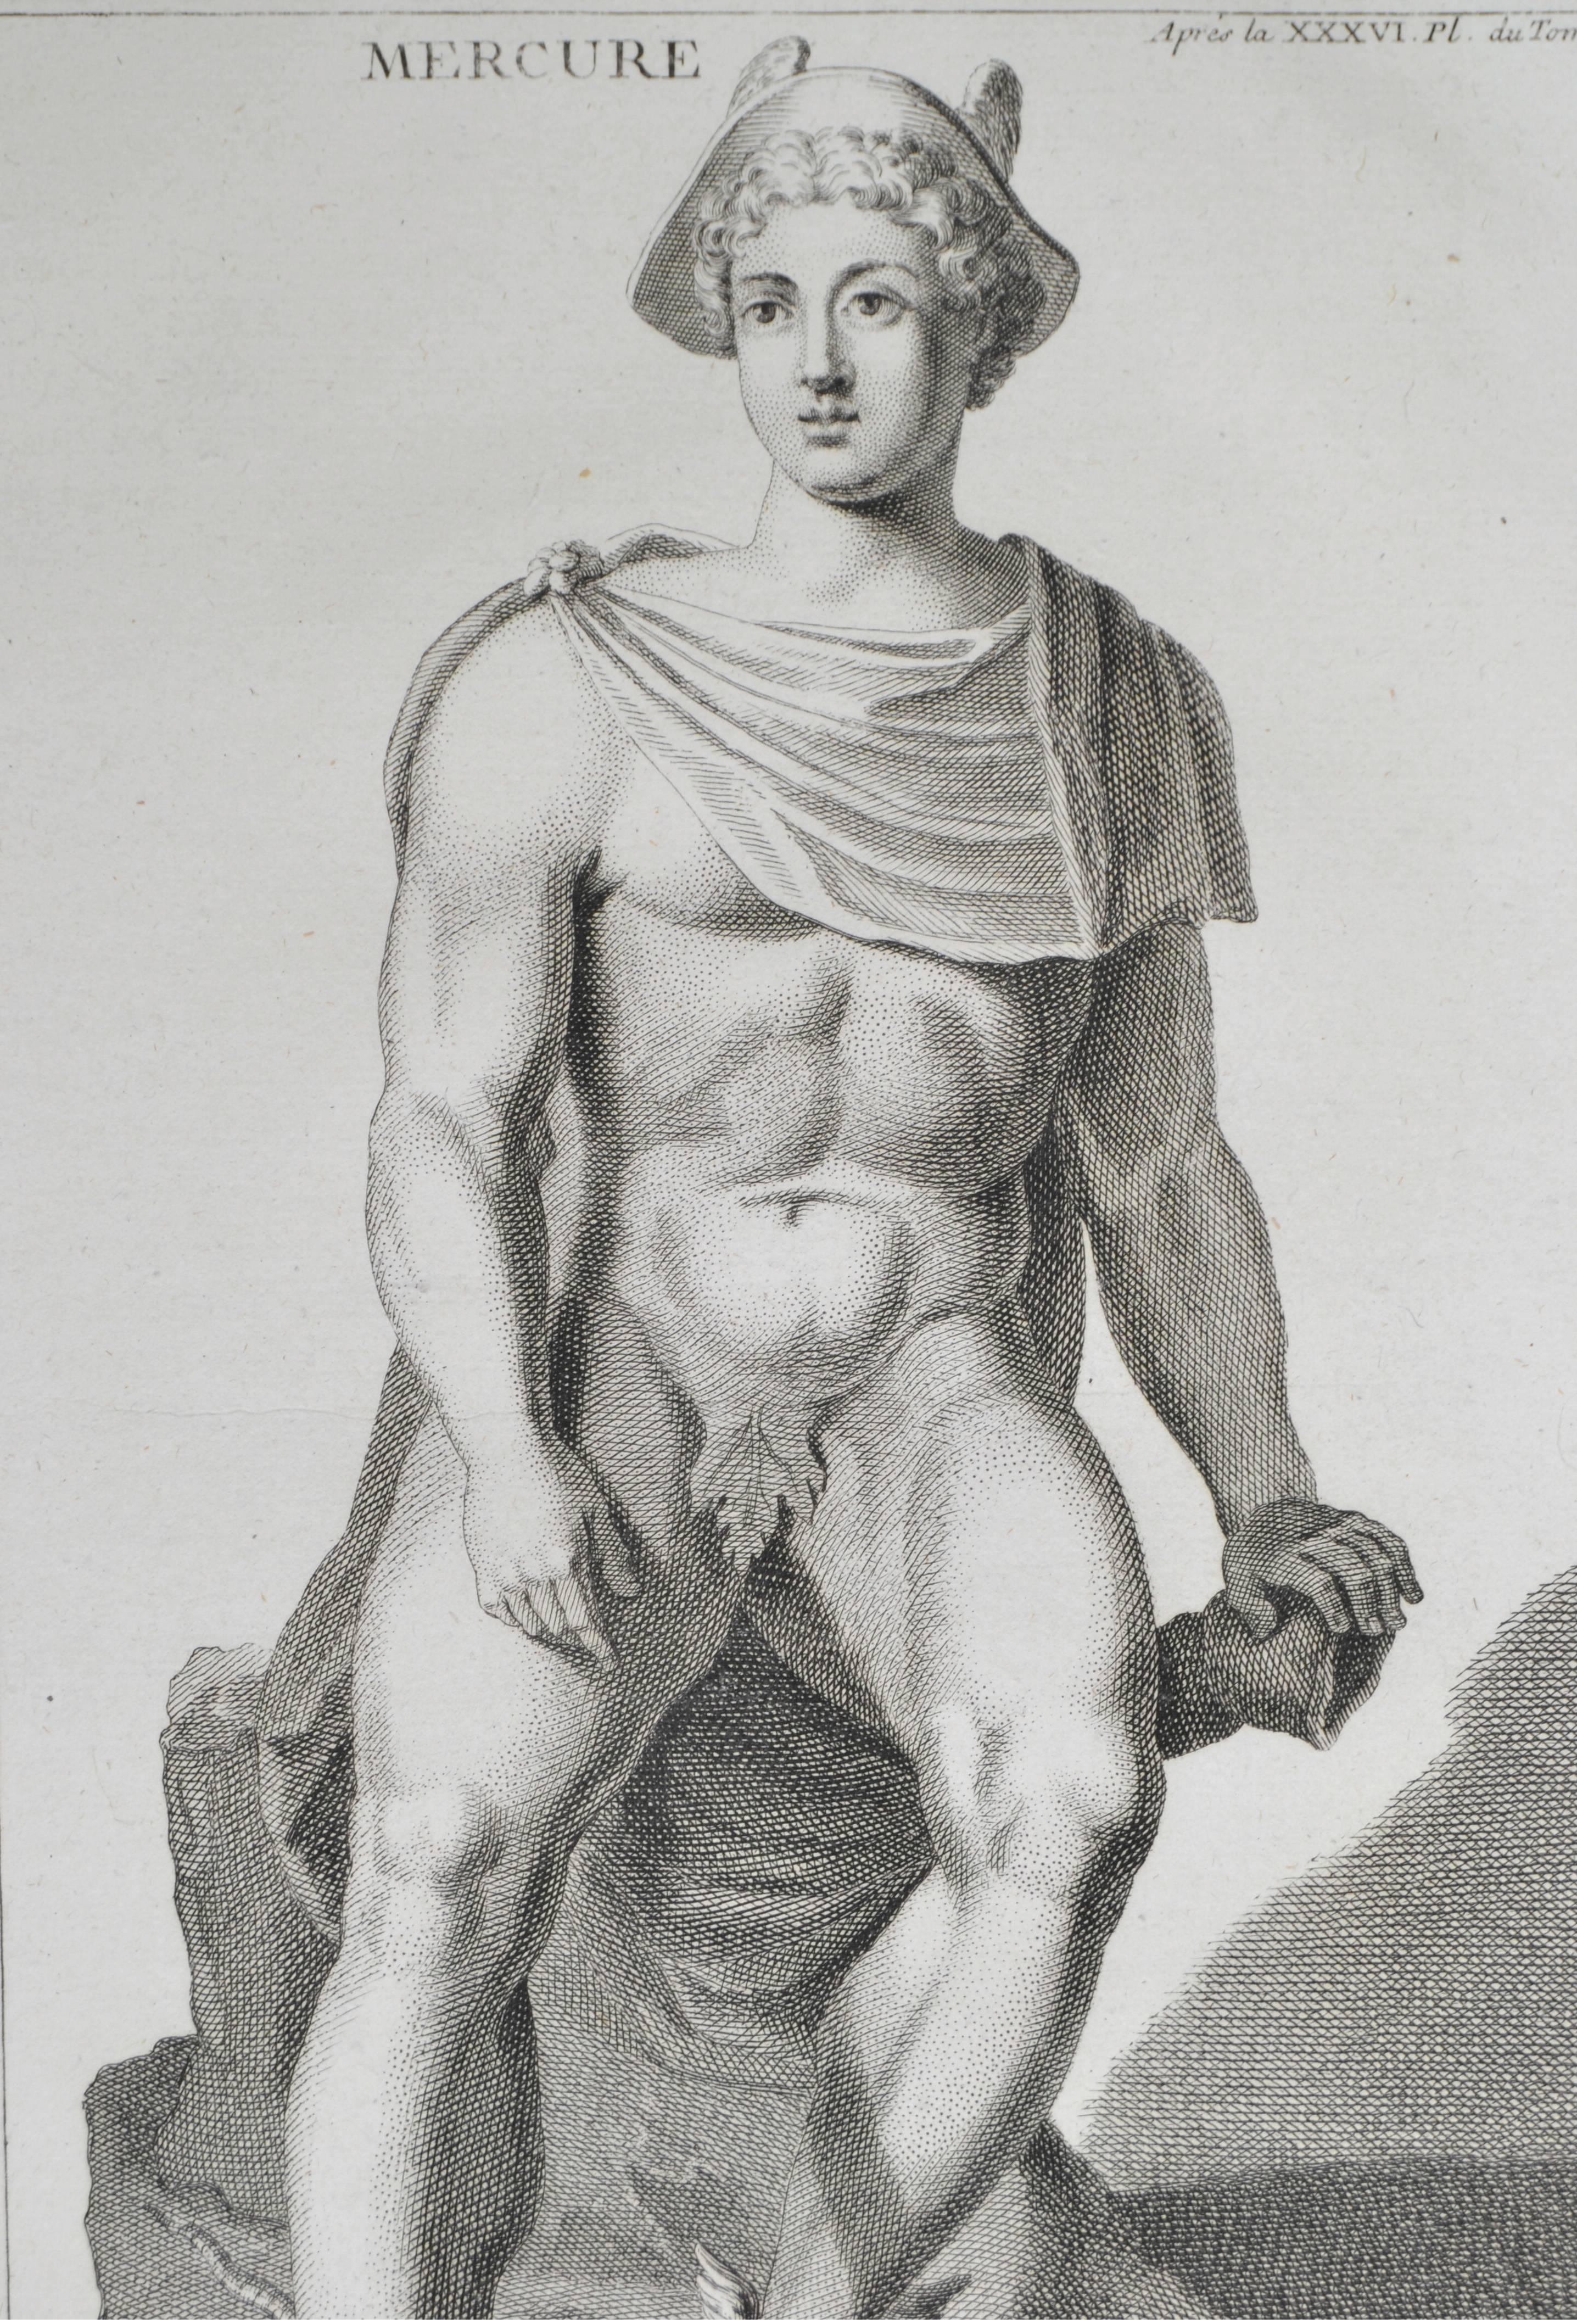 Copper engraving featuring Mercury.
From the book L'antiquite Expliquee et Representee en Figures. By the Benedisctine Monk Bernard de Montfaucon.
In mat and ready to frame.